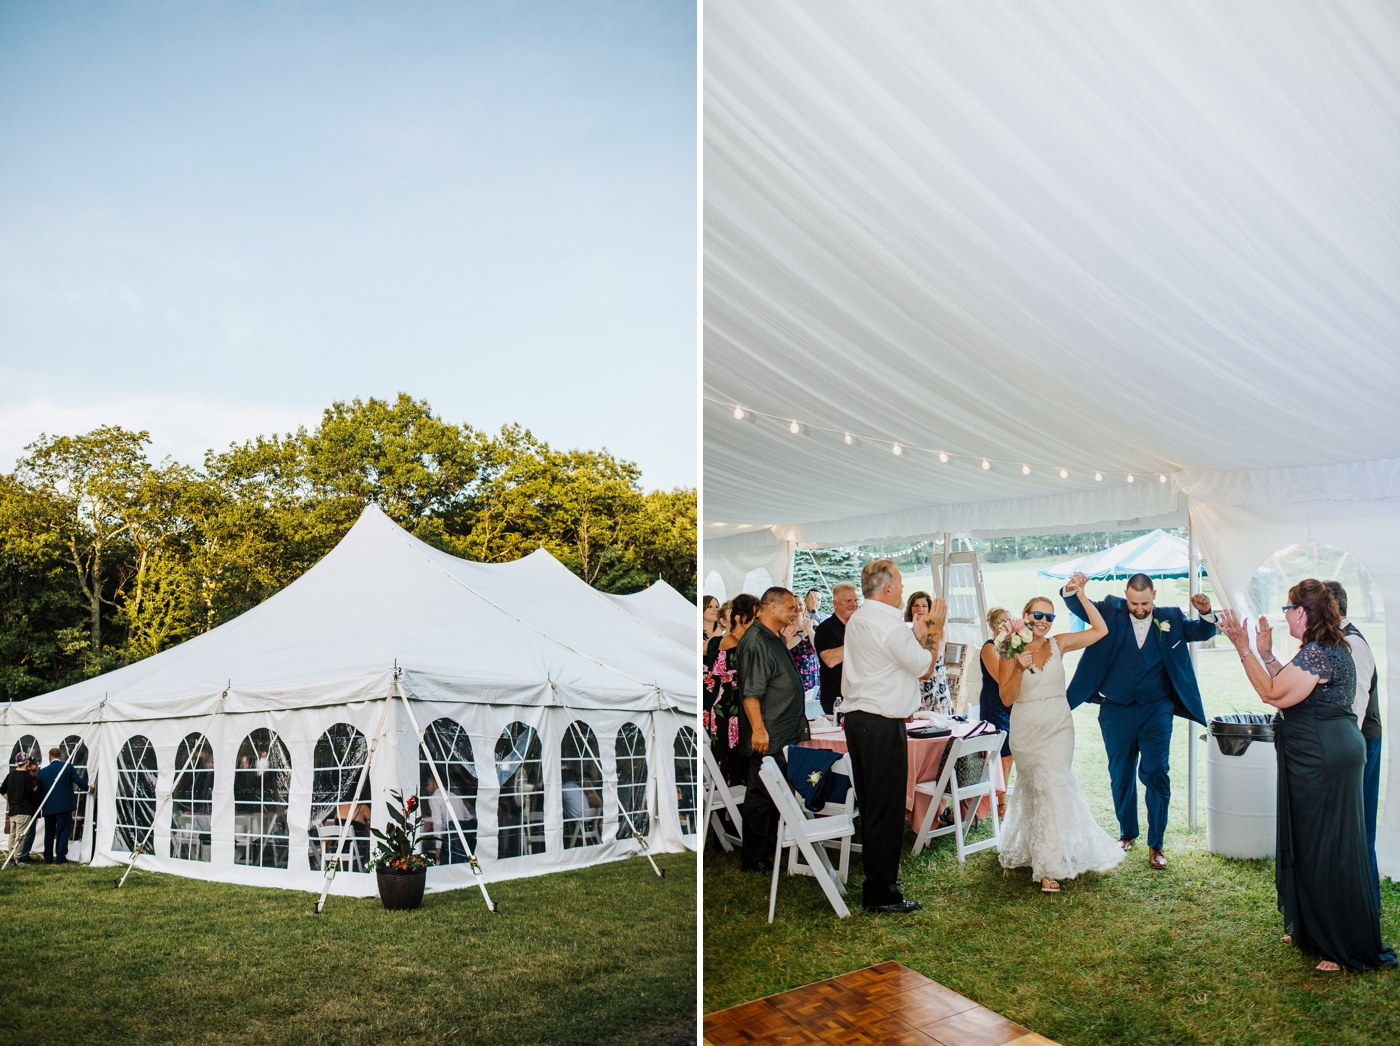 Tented wedding ceremony on a farm in The Pocono Mountains